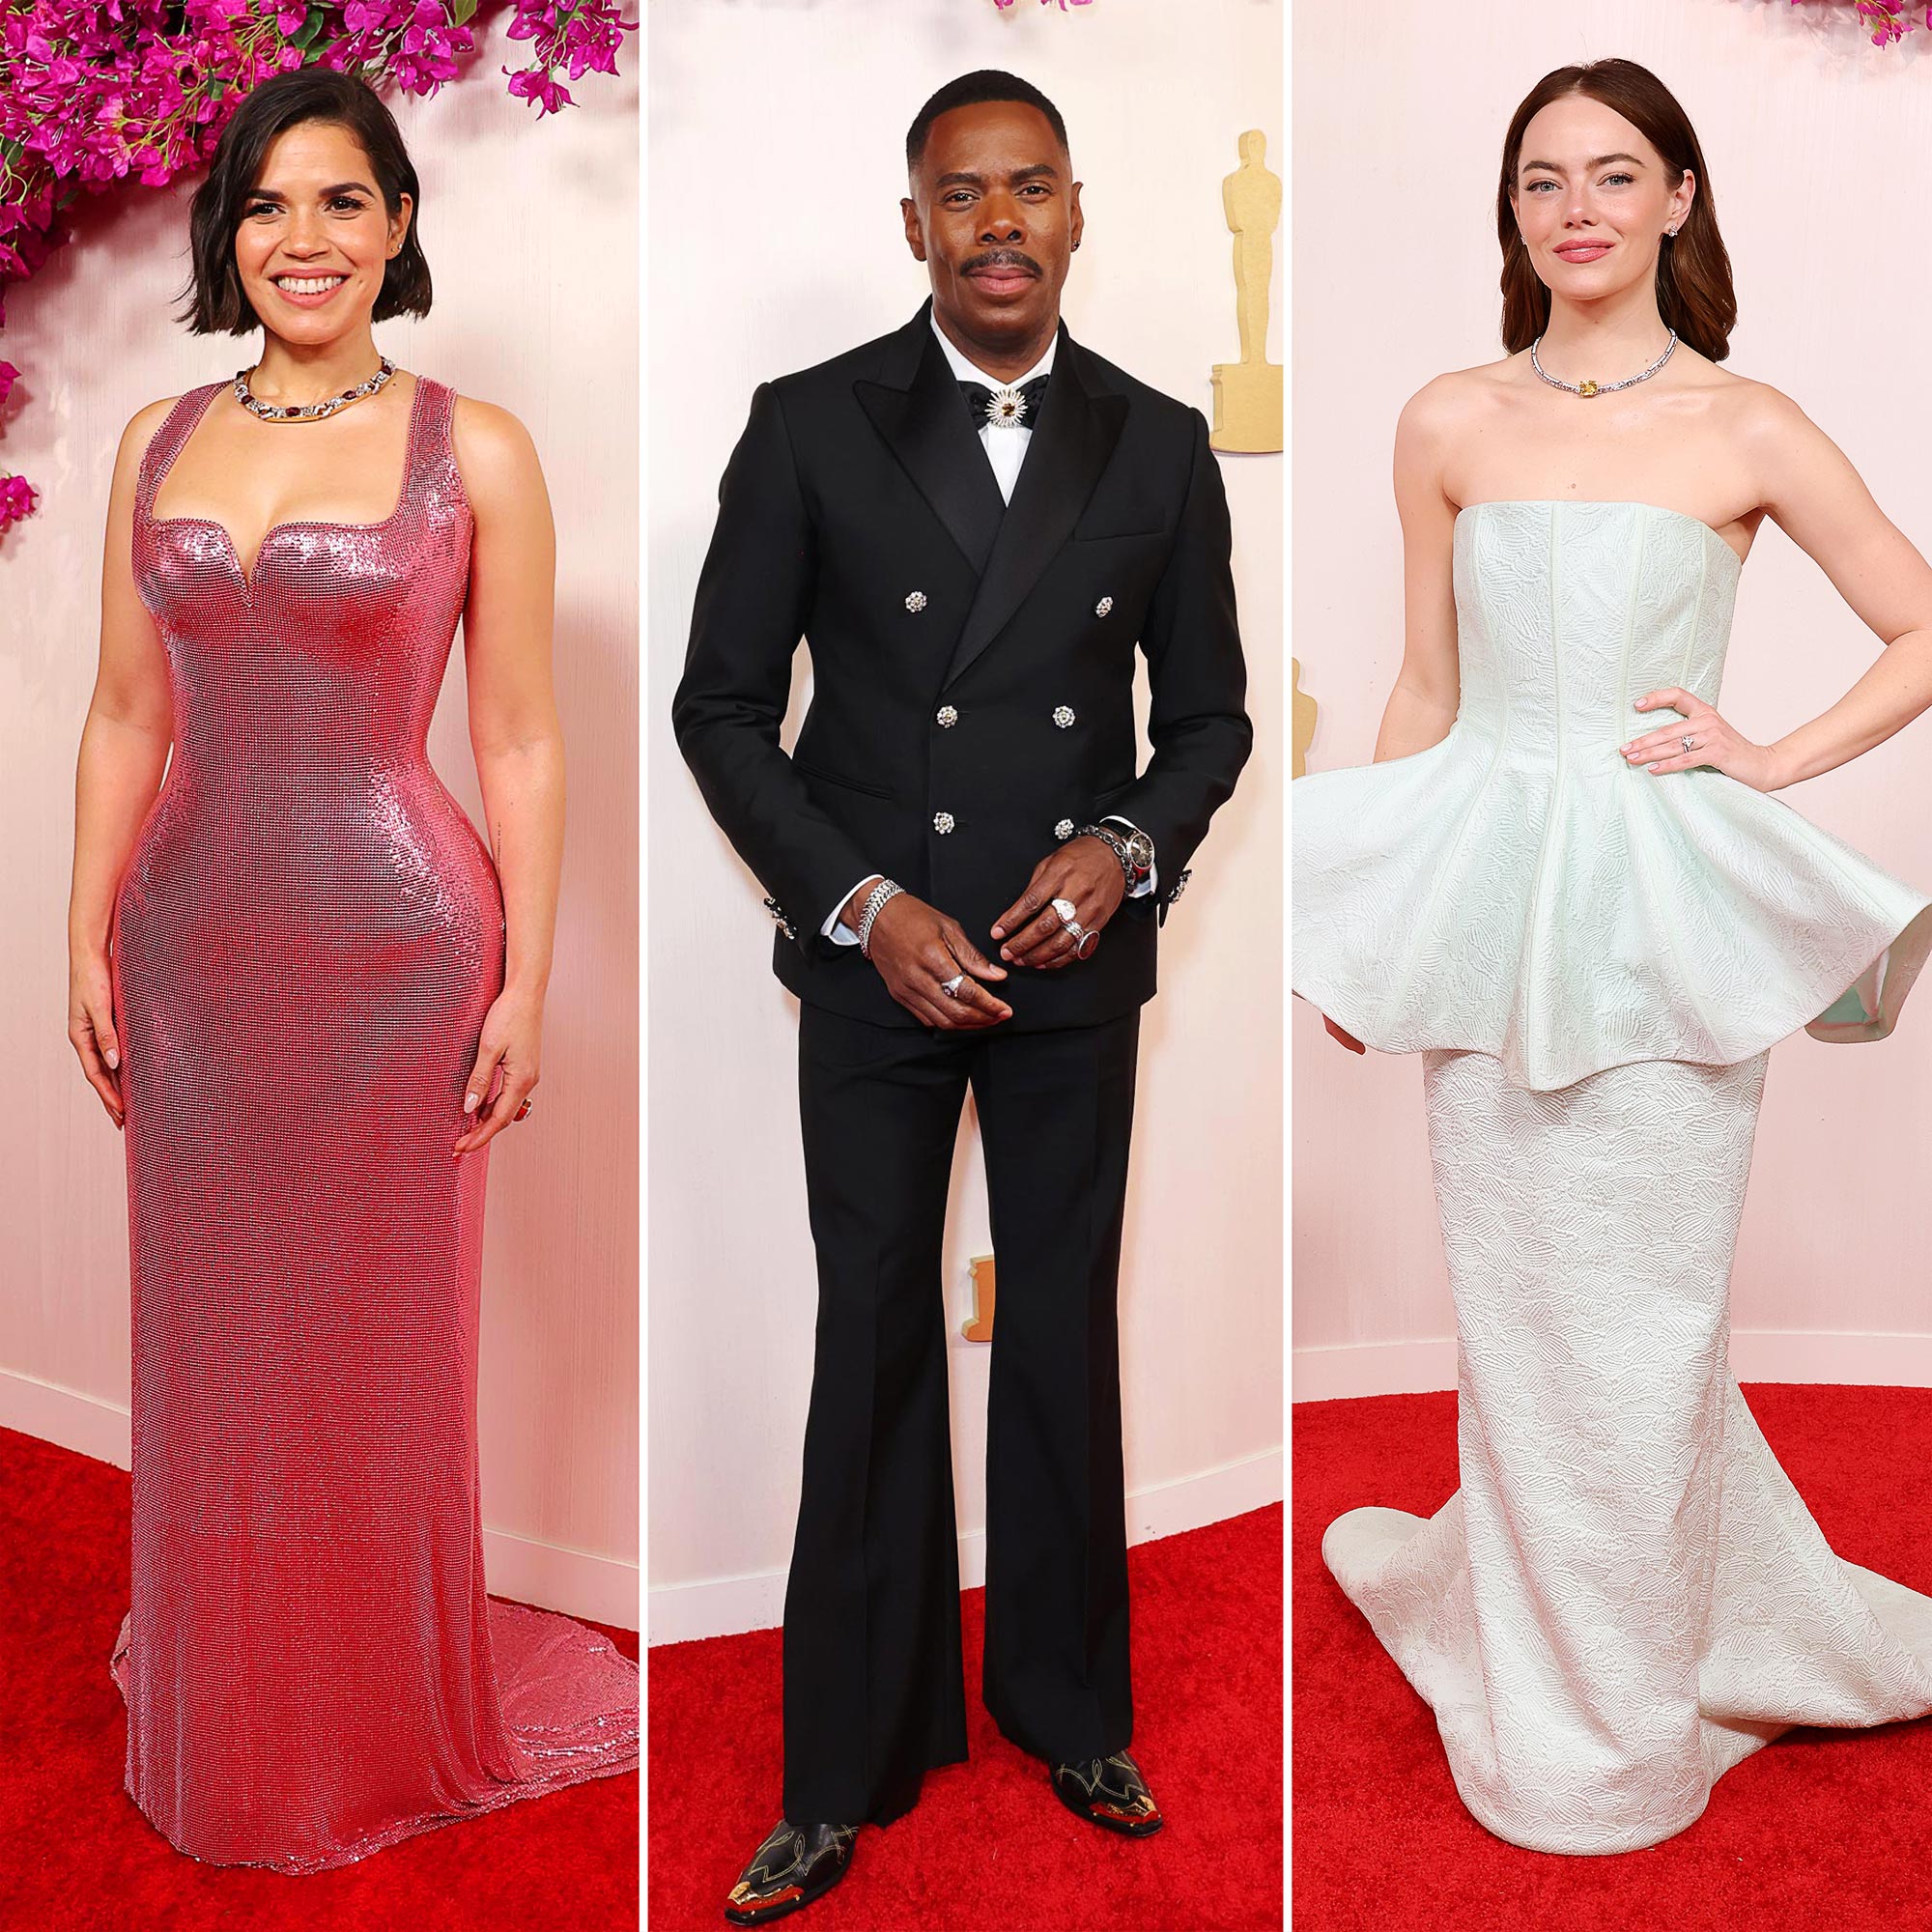 Oscars red carpet 2022 photos: Best and worst dressed - GoldDerby